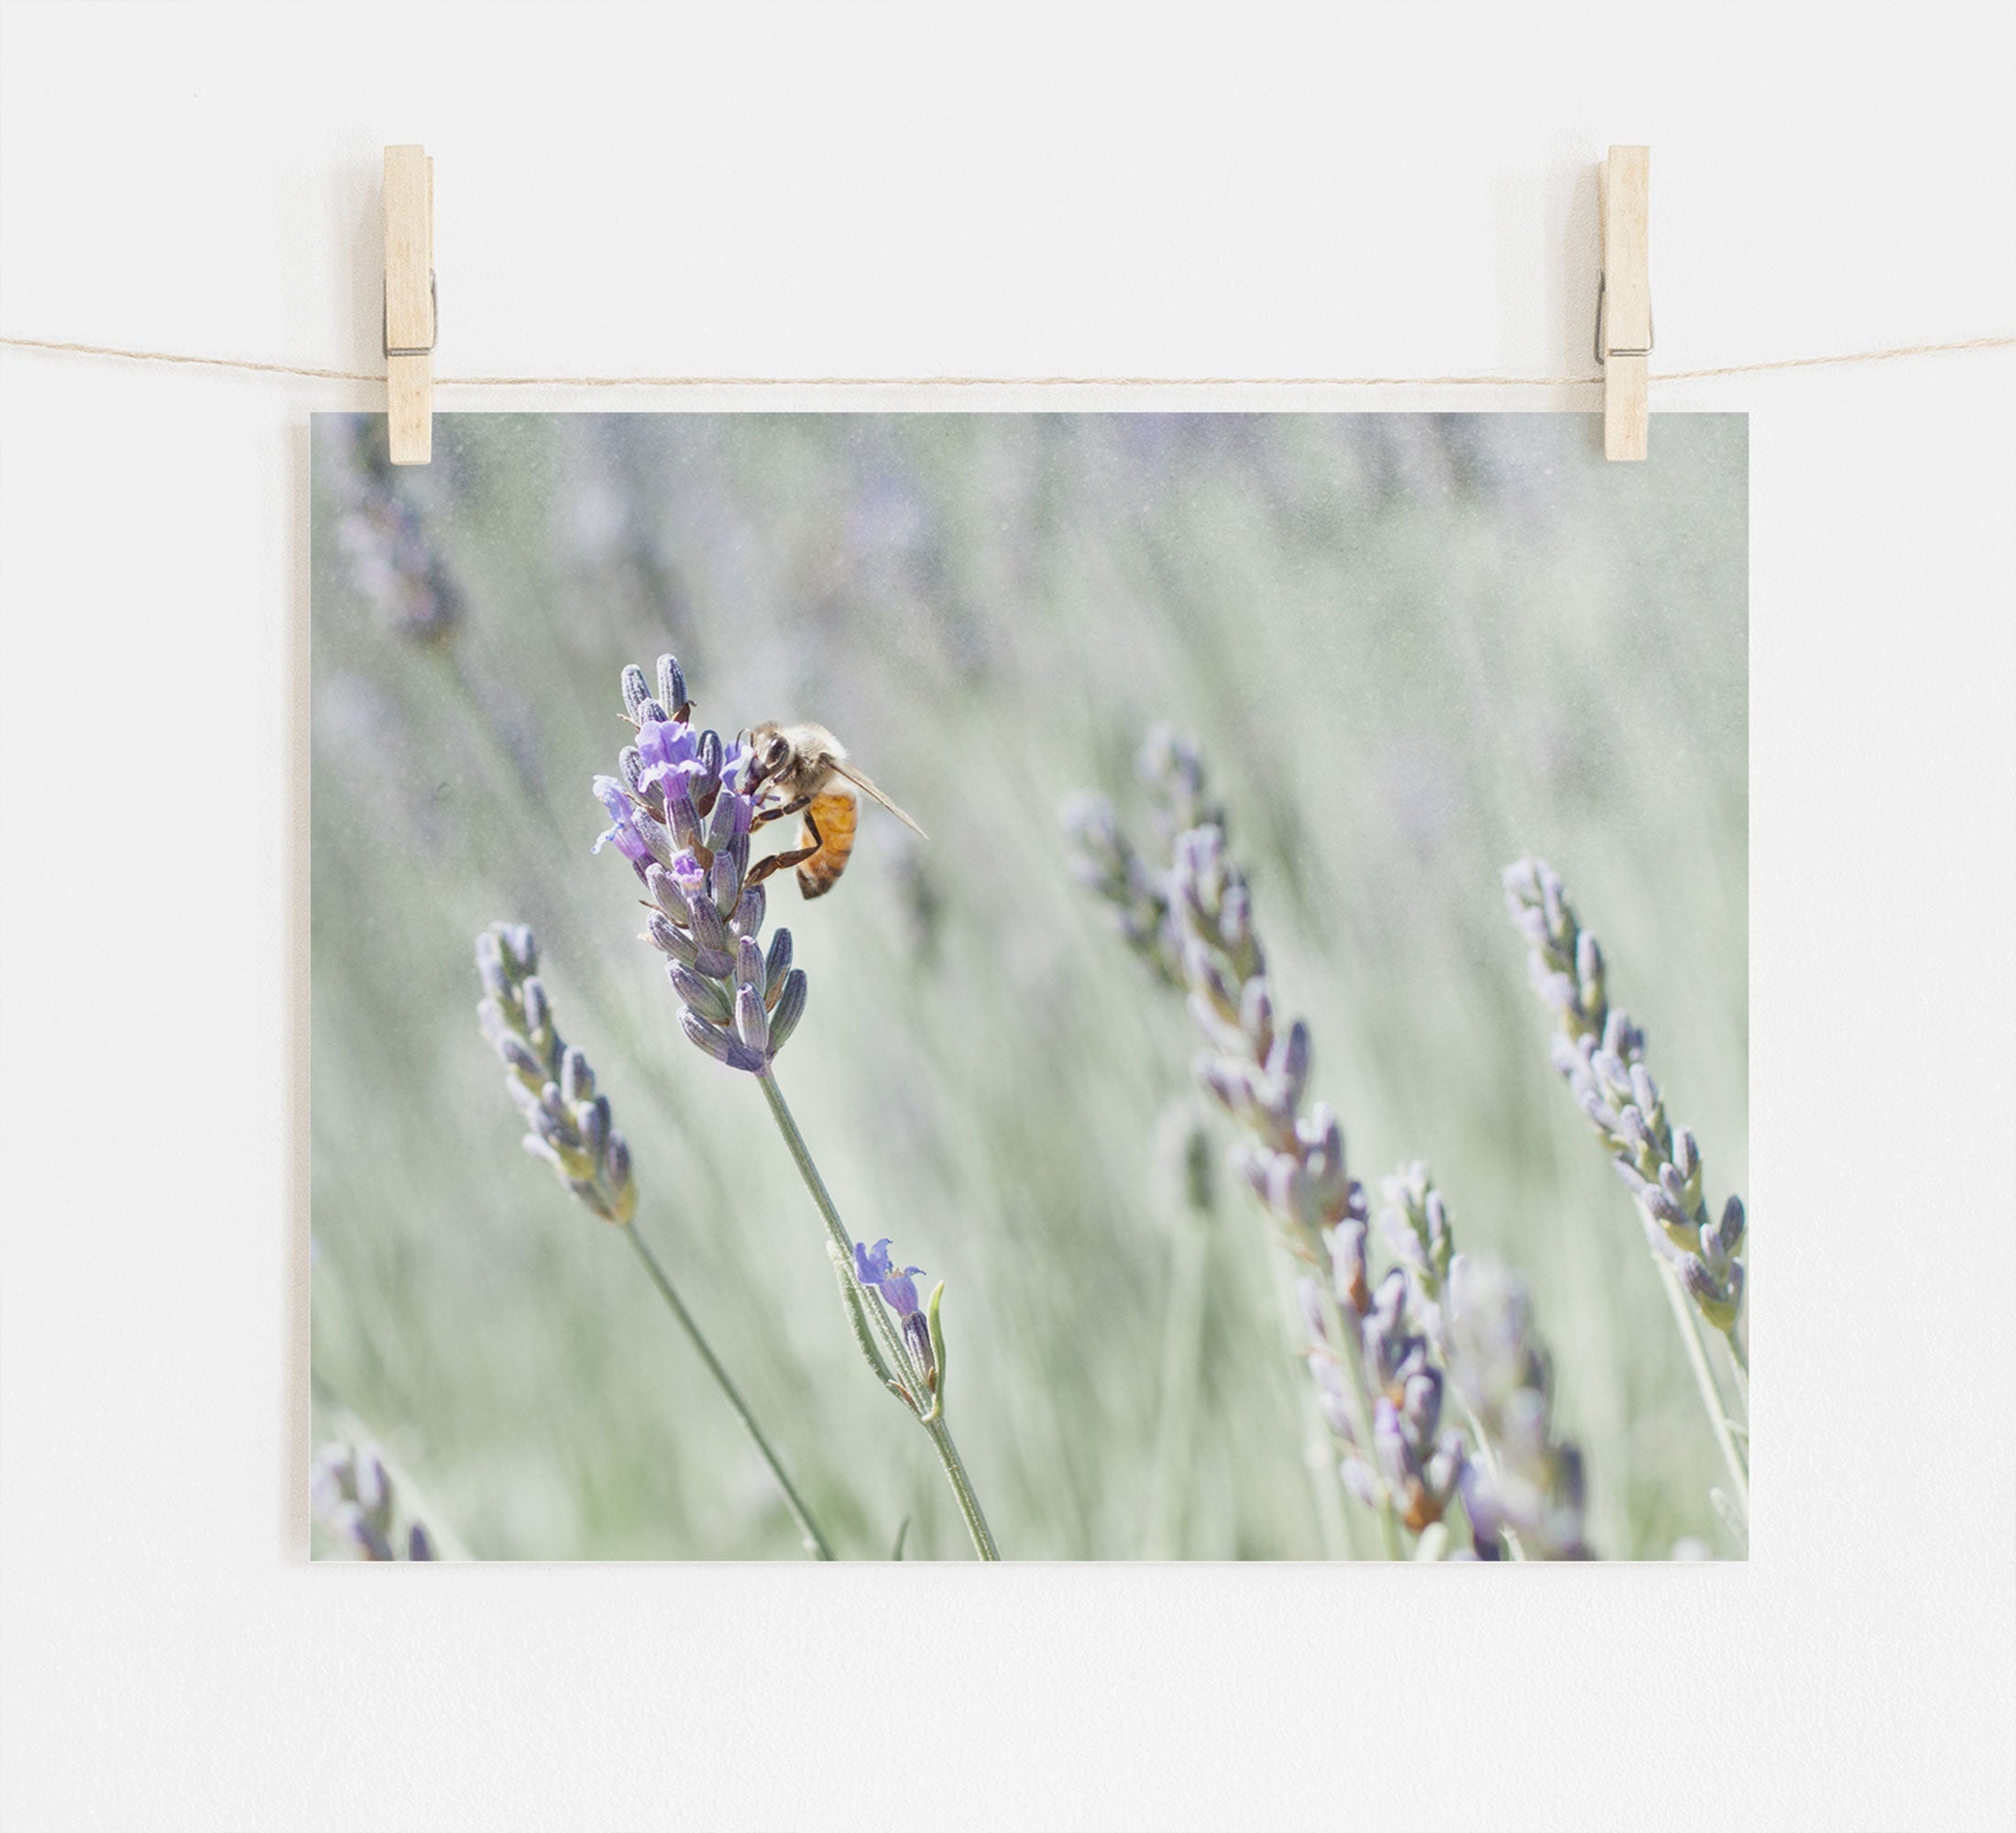 A photograph of the Rustic Floral Print, &#39;Lavender for Bees&#39;, pinned on a string by wooden clothespins against a white background, printed on archival photographic paper.